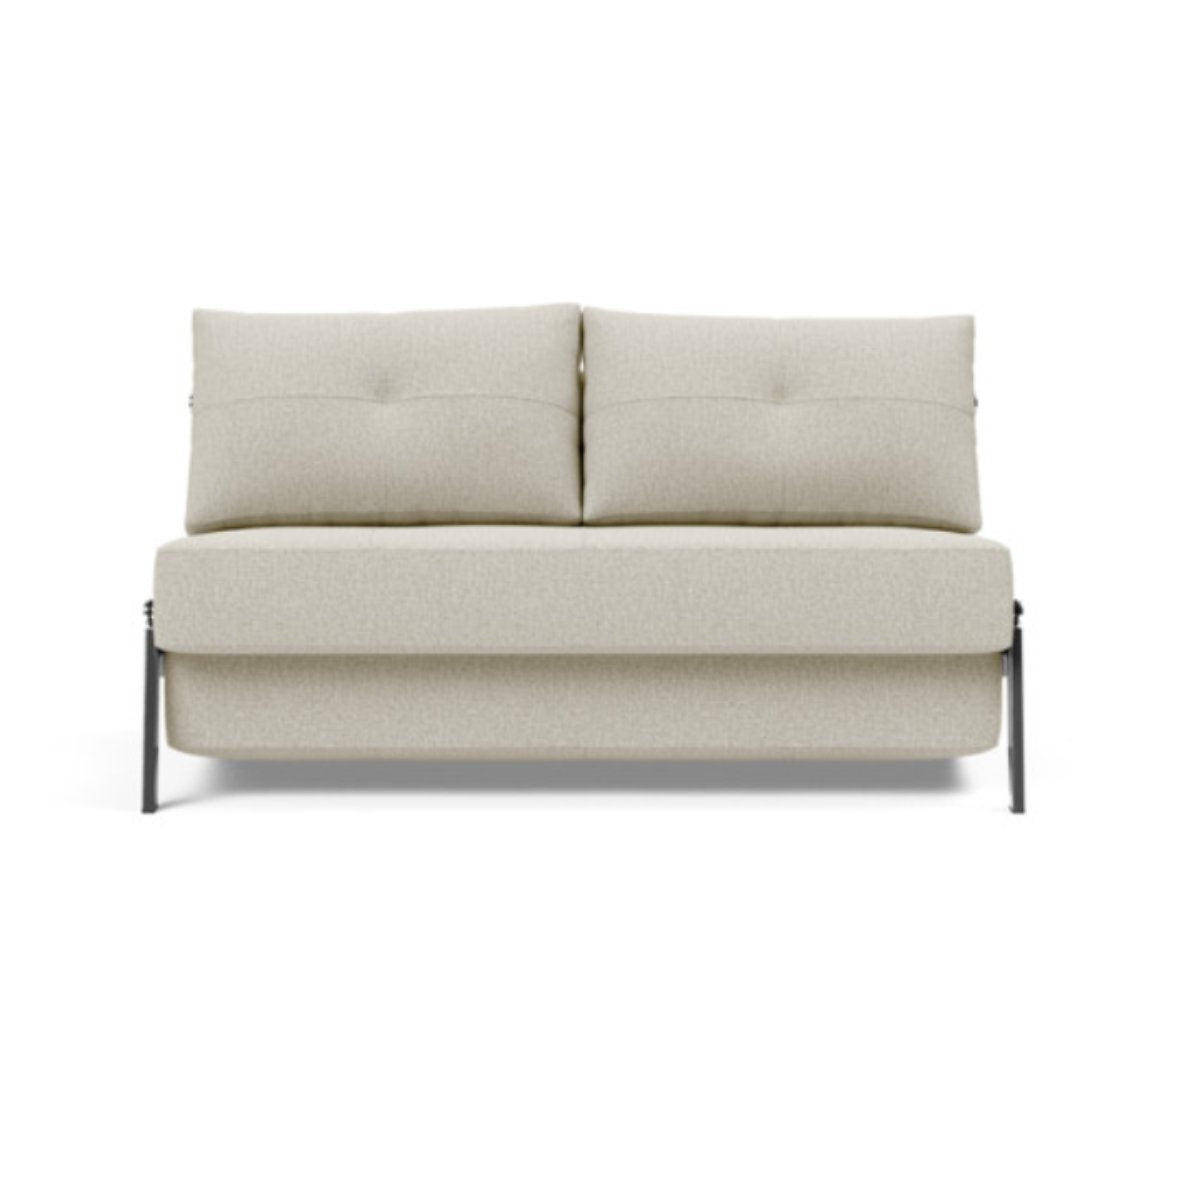 Cubed Full Size Sofa Bed With Chrome Legs 527 Mixed Dance NaturalSofa Beds INNOVATION  527 Mixed Dance Natural   Four Hands, Burke Decor, Mid Century Modern Furniture, Old Bones Furniture Company, Old Bones Co, Modern Mid Century, Designer Furniture, https://www.oldbonesco.com/